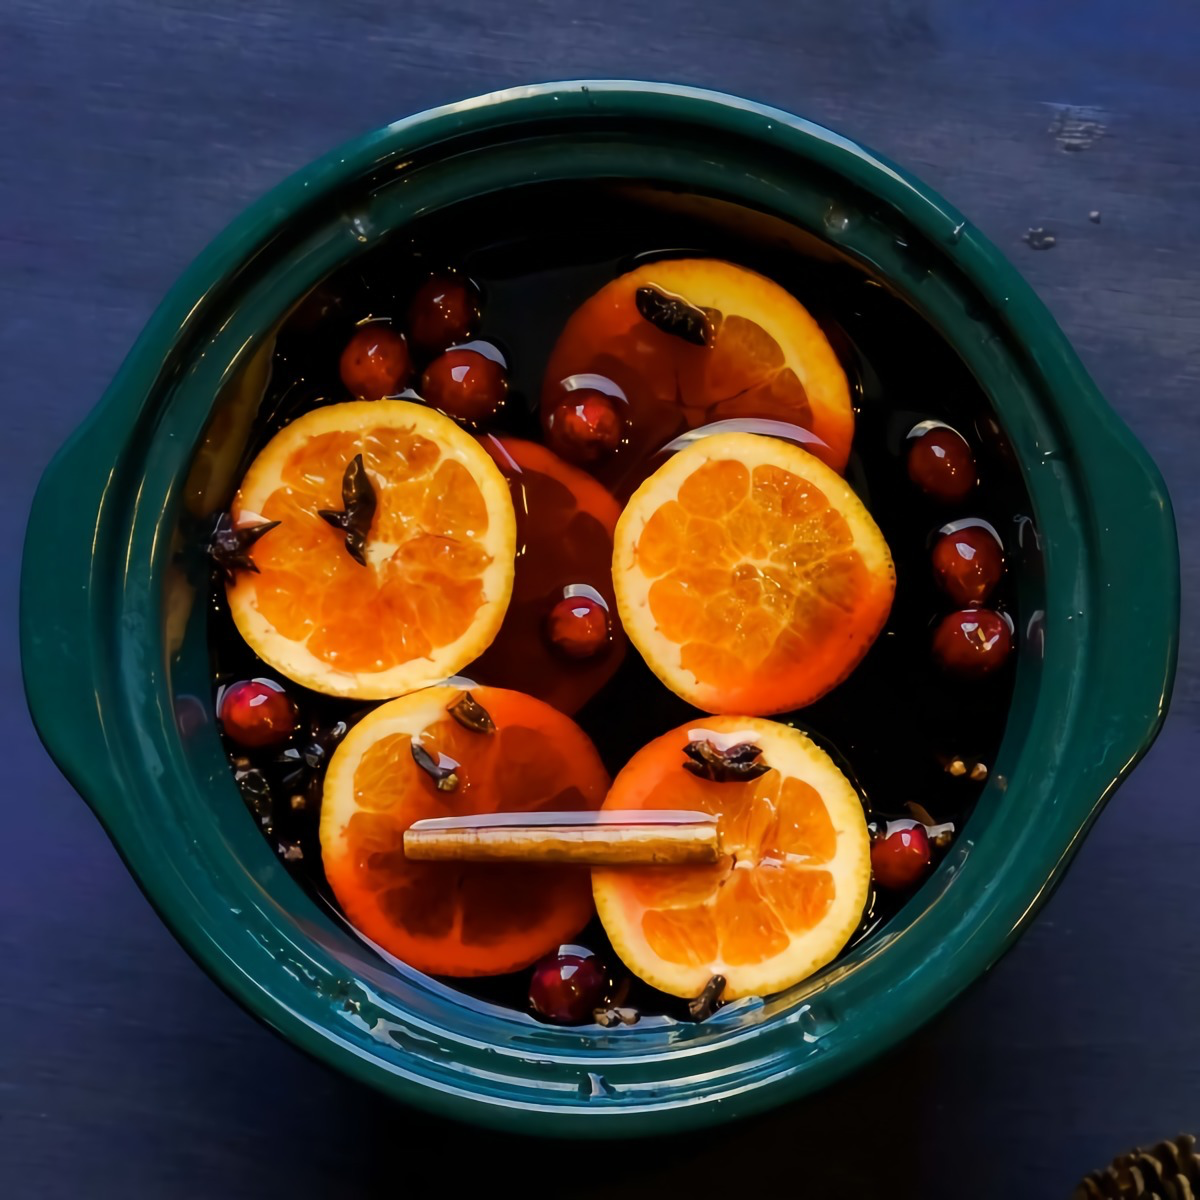 mulled wine benefits